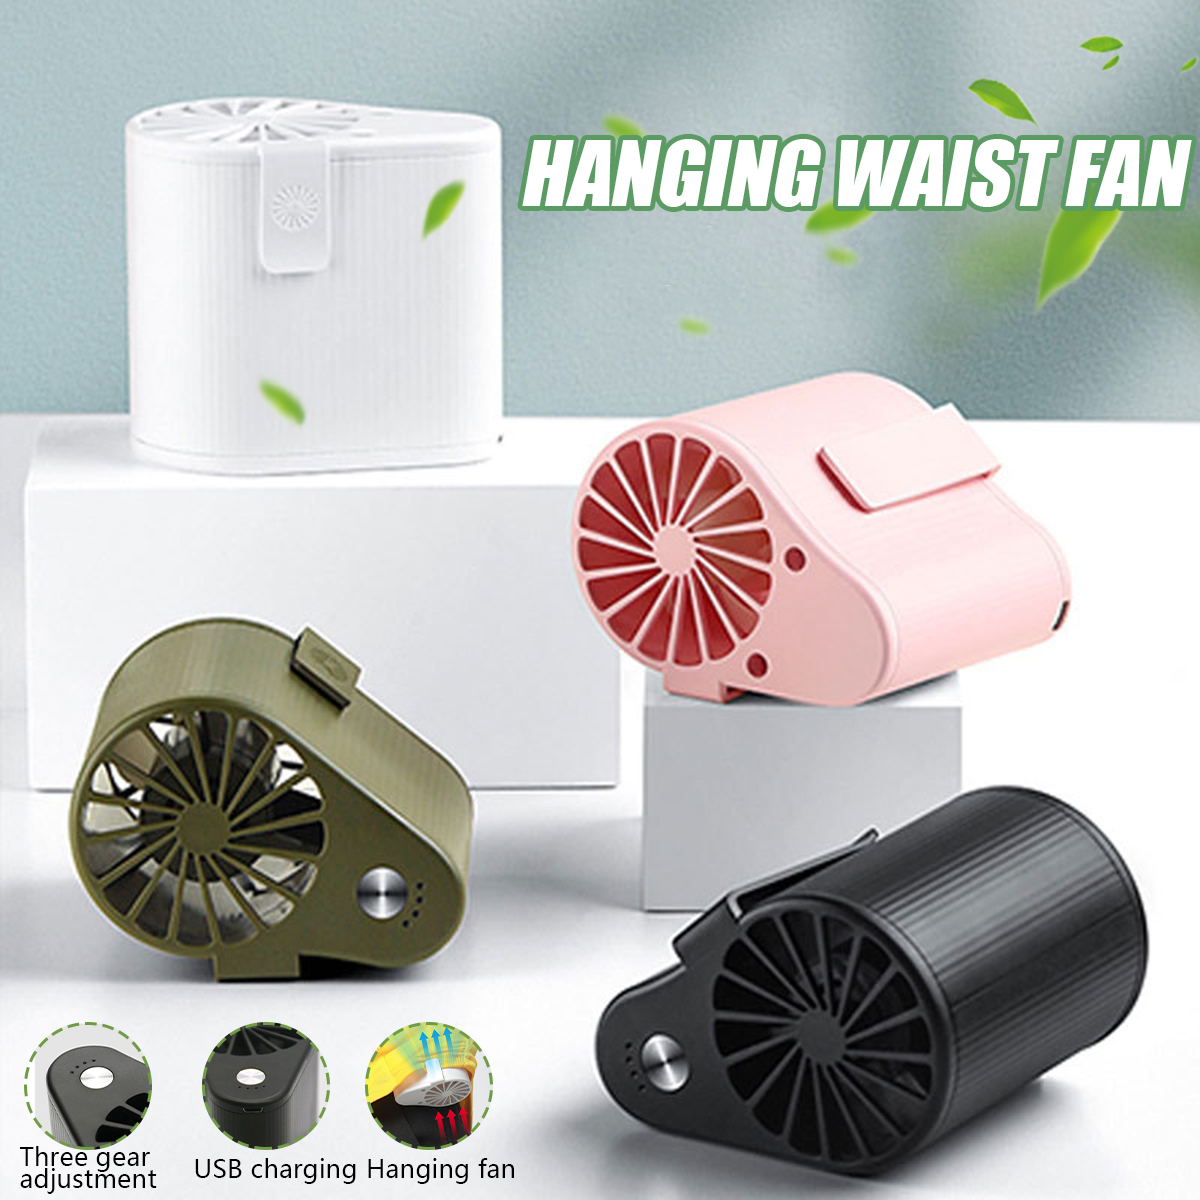 4W-Waist-Hanging-Fan-USB-Rechargeable-3-Modes-Mini-Air-Conditioner-Fan-Camping-Travel-Office-1696588-1